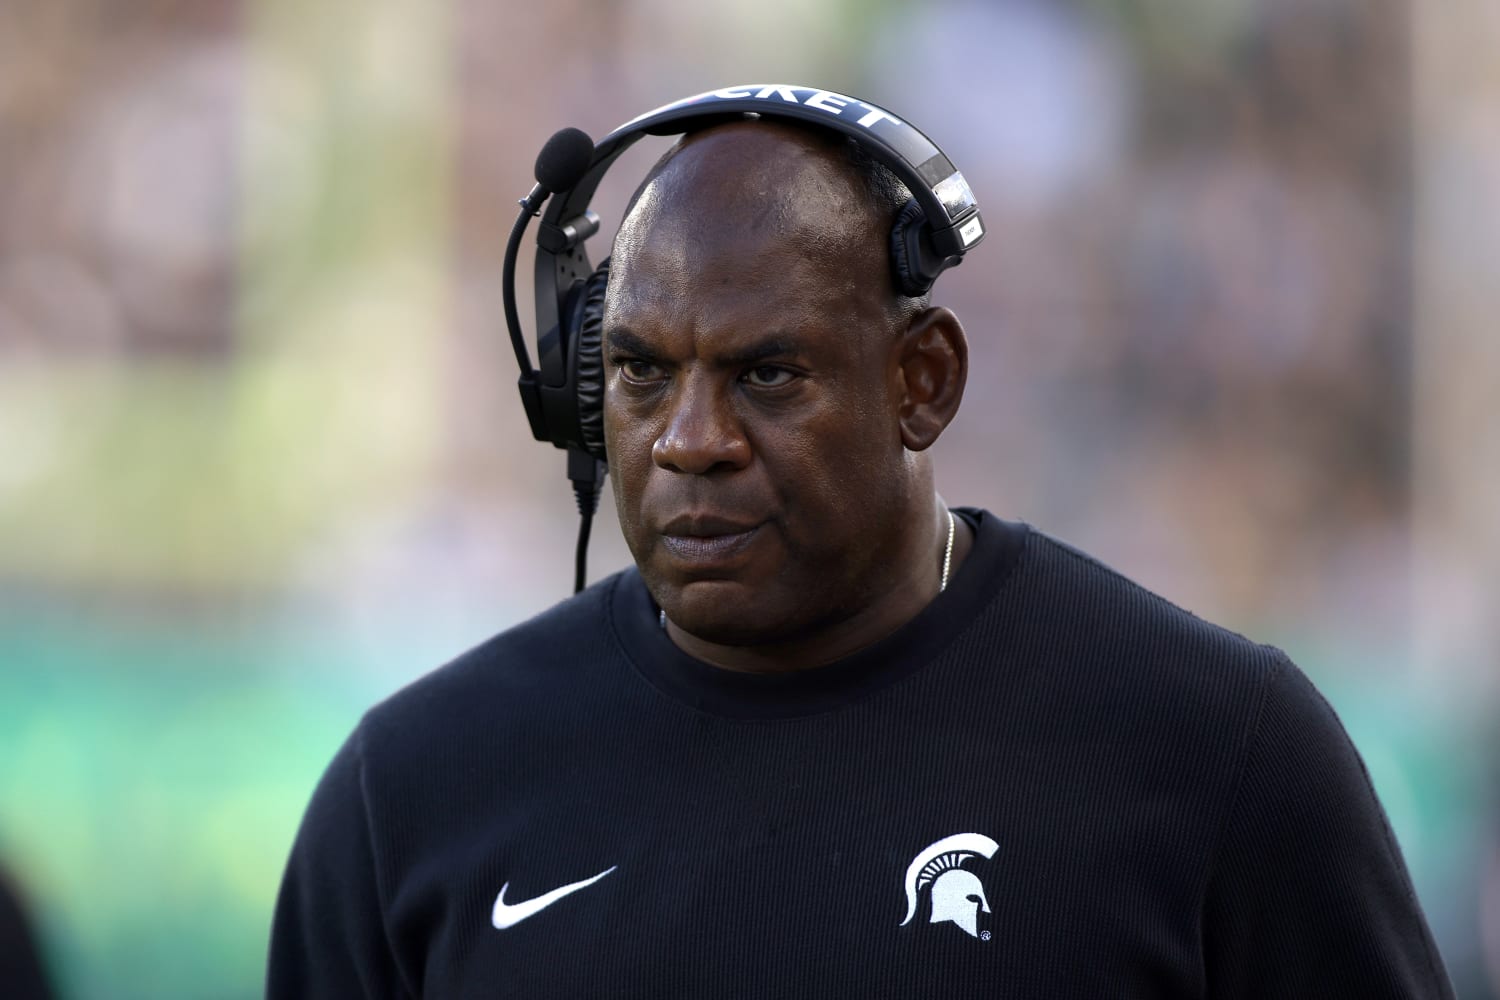 Michigan State suspends head football coach after report of harassment allegations